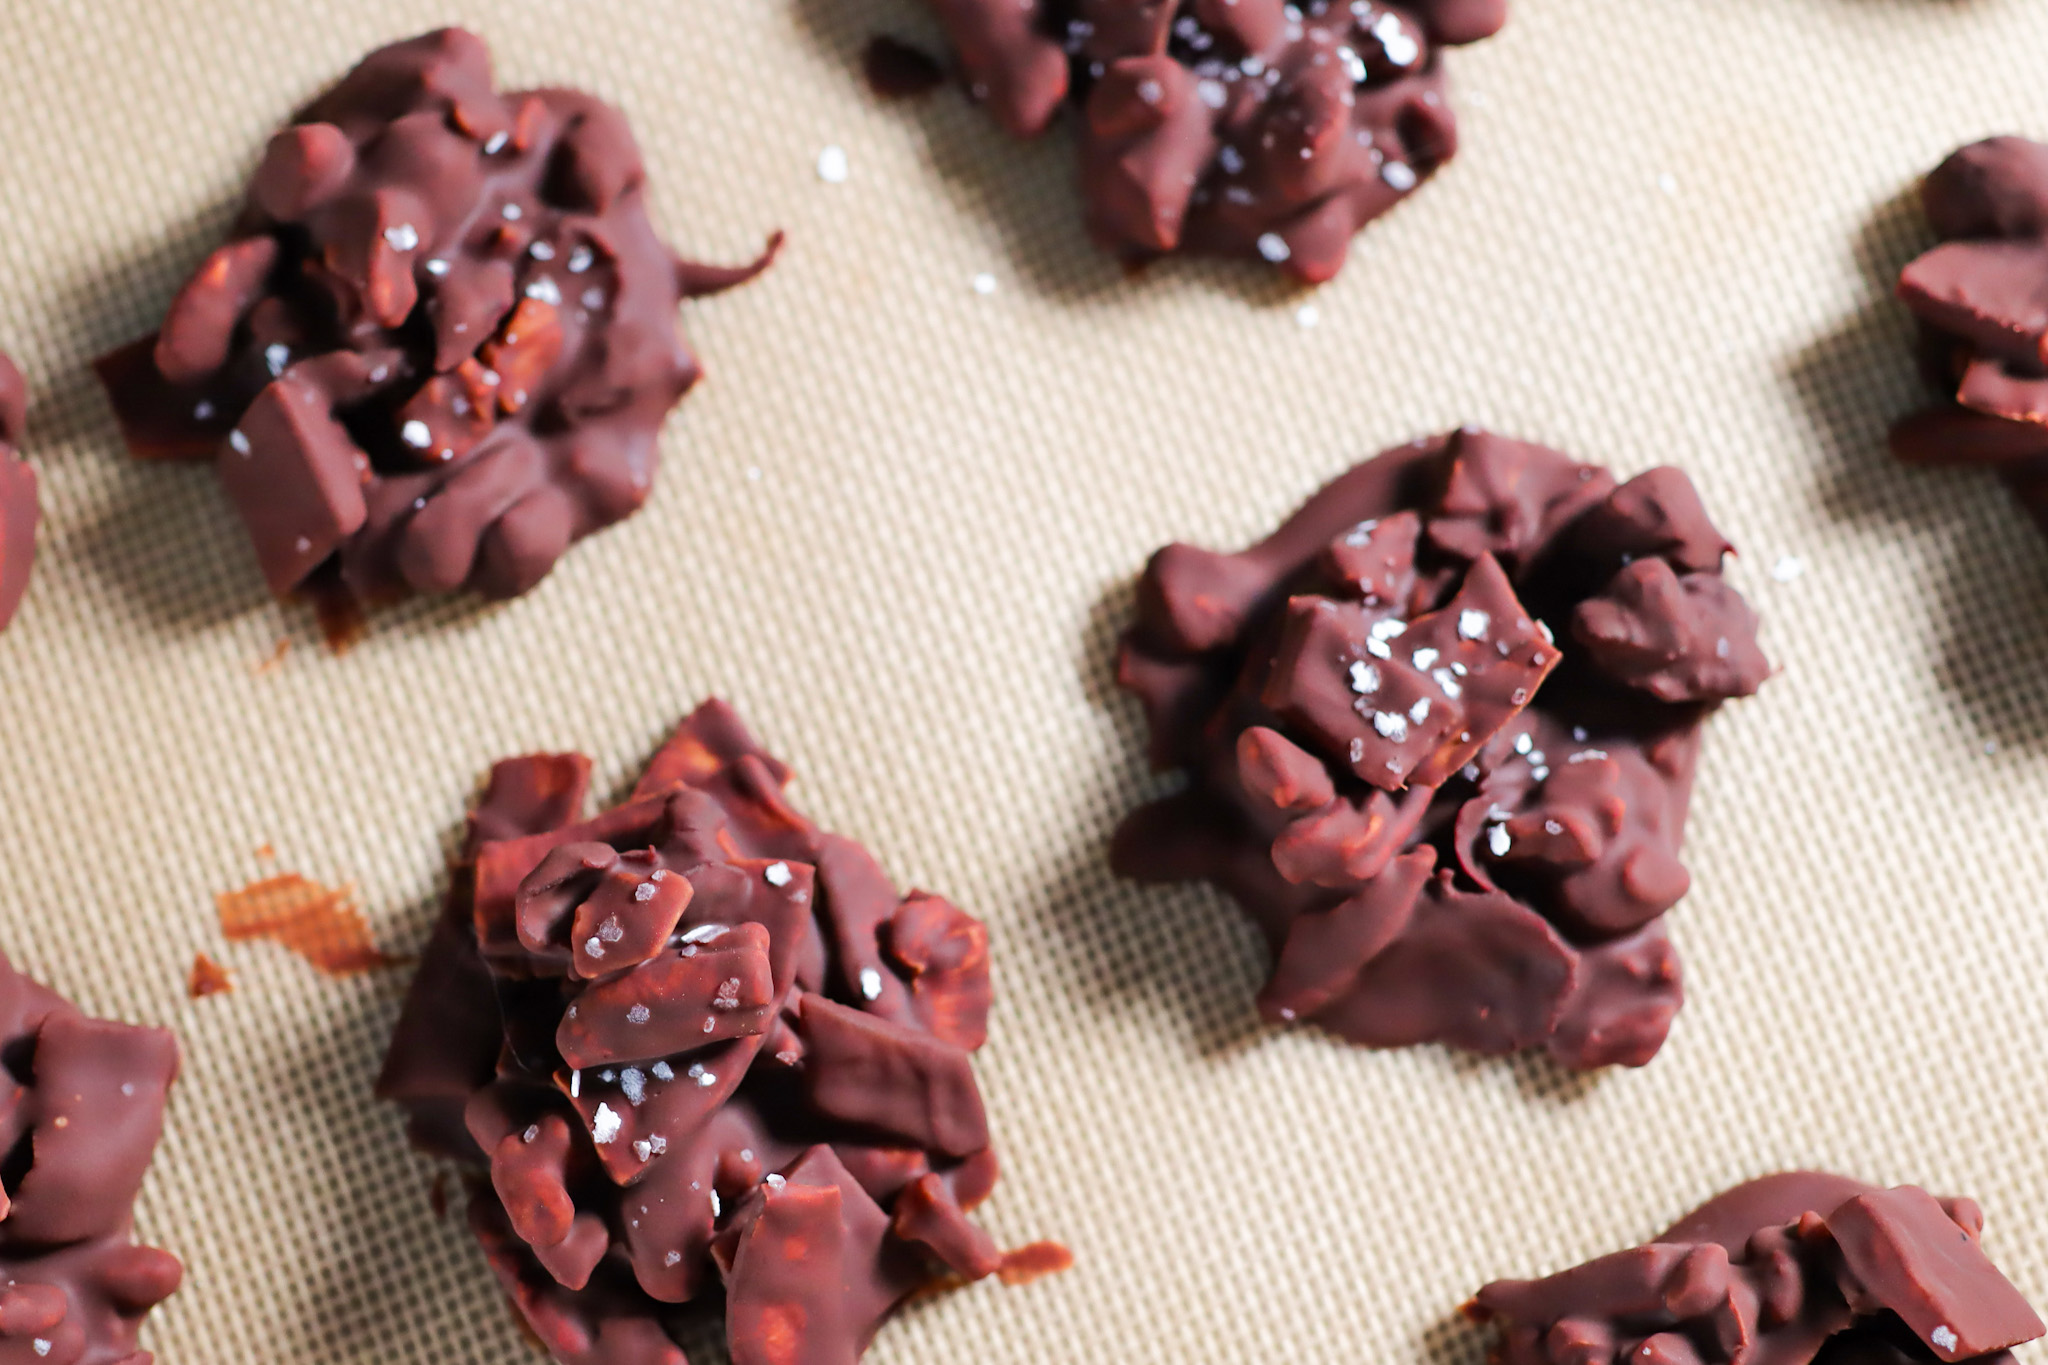 Chocolate Nut Clusters (with Pistachios and Dried Fruit)